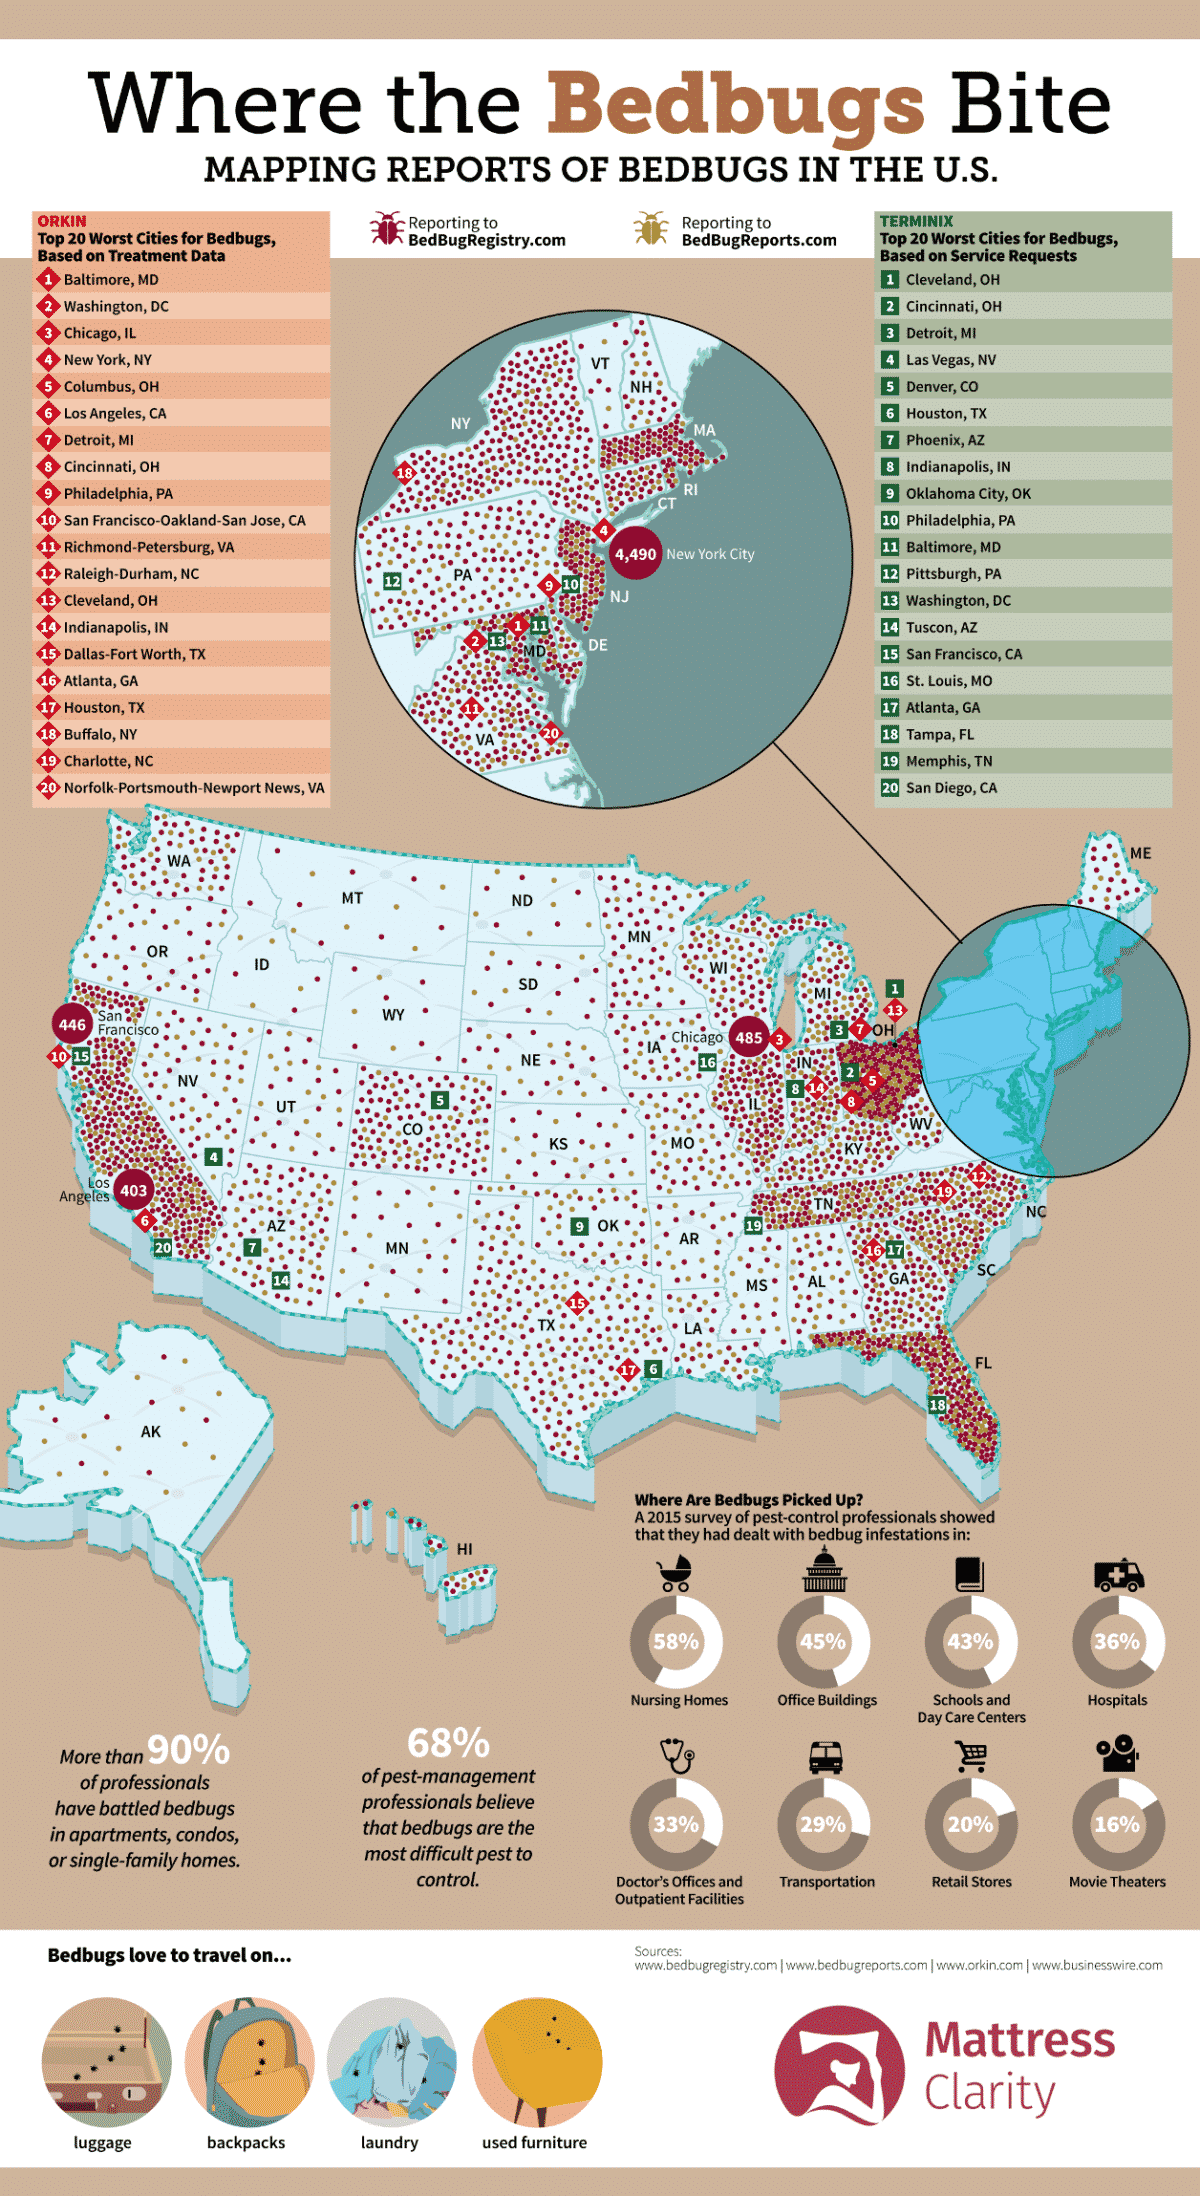 map of where bedbug infestations have been reported